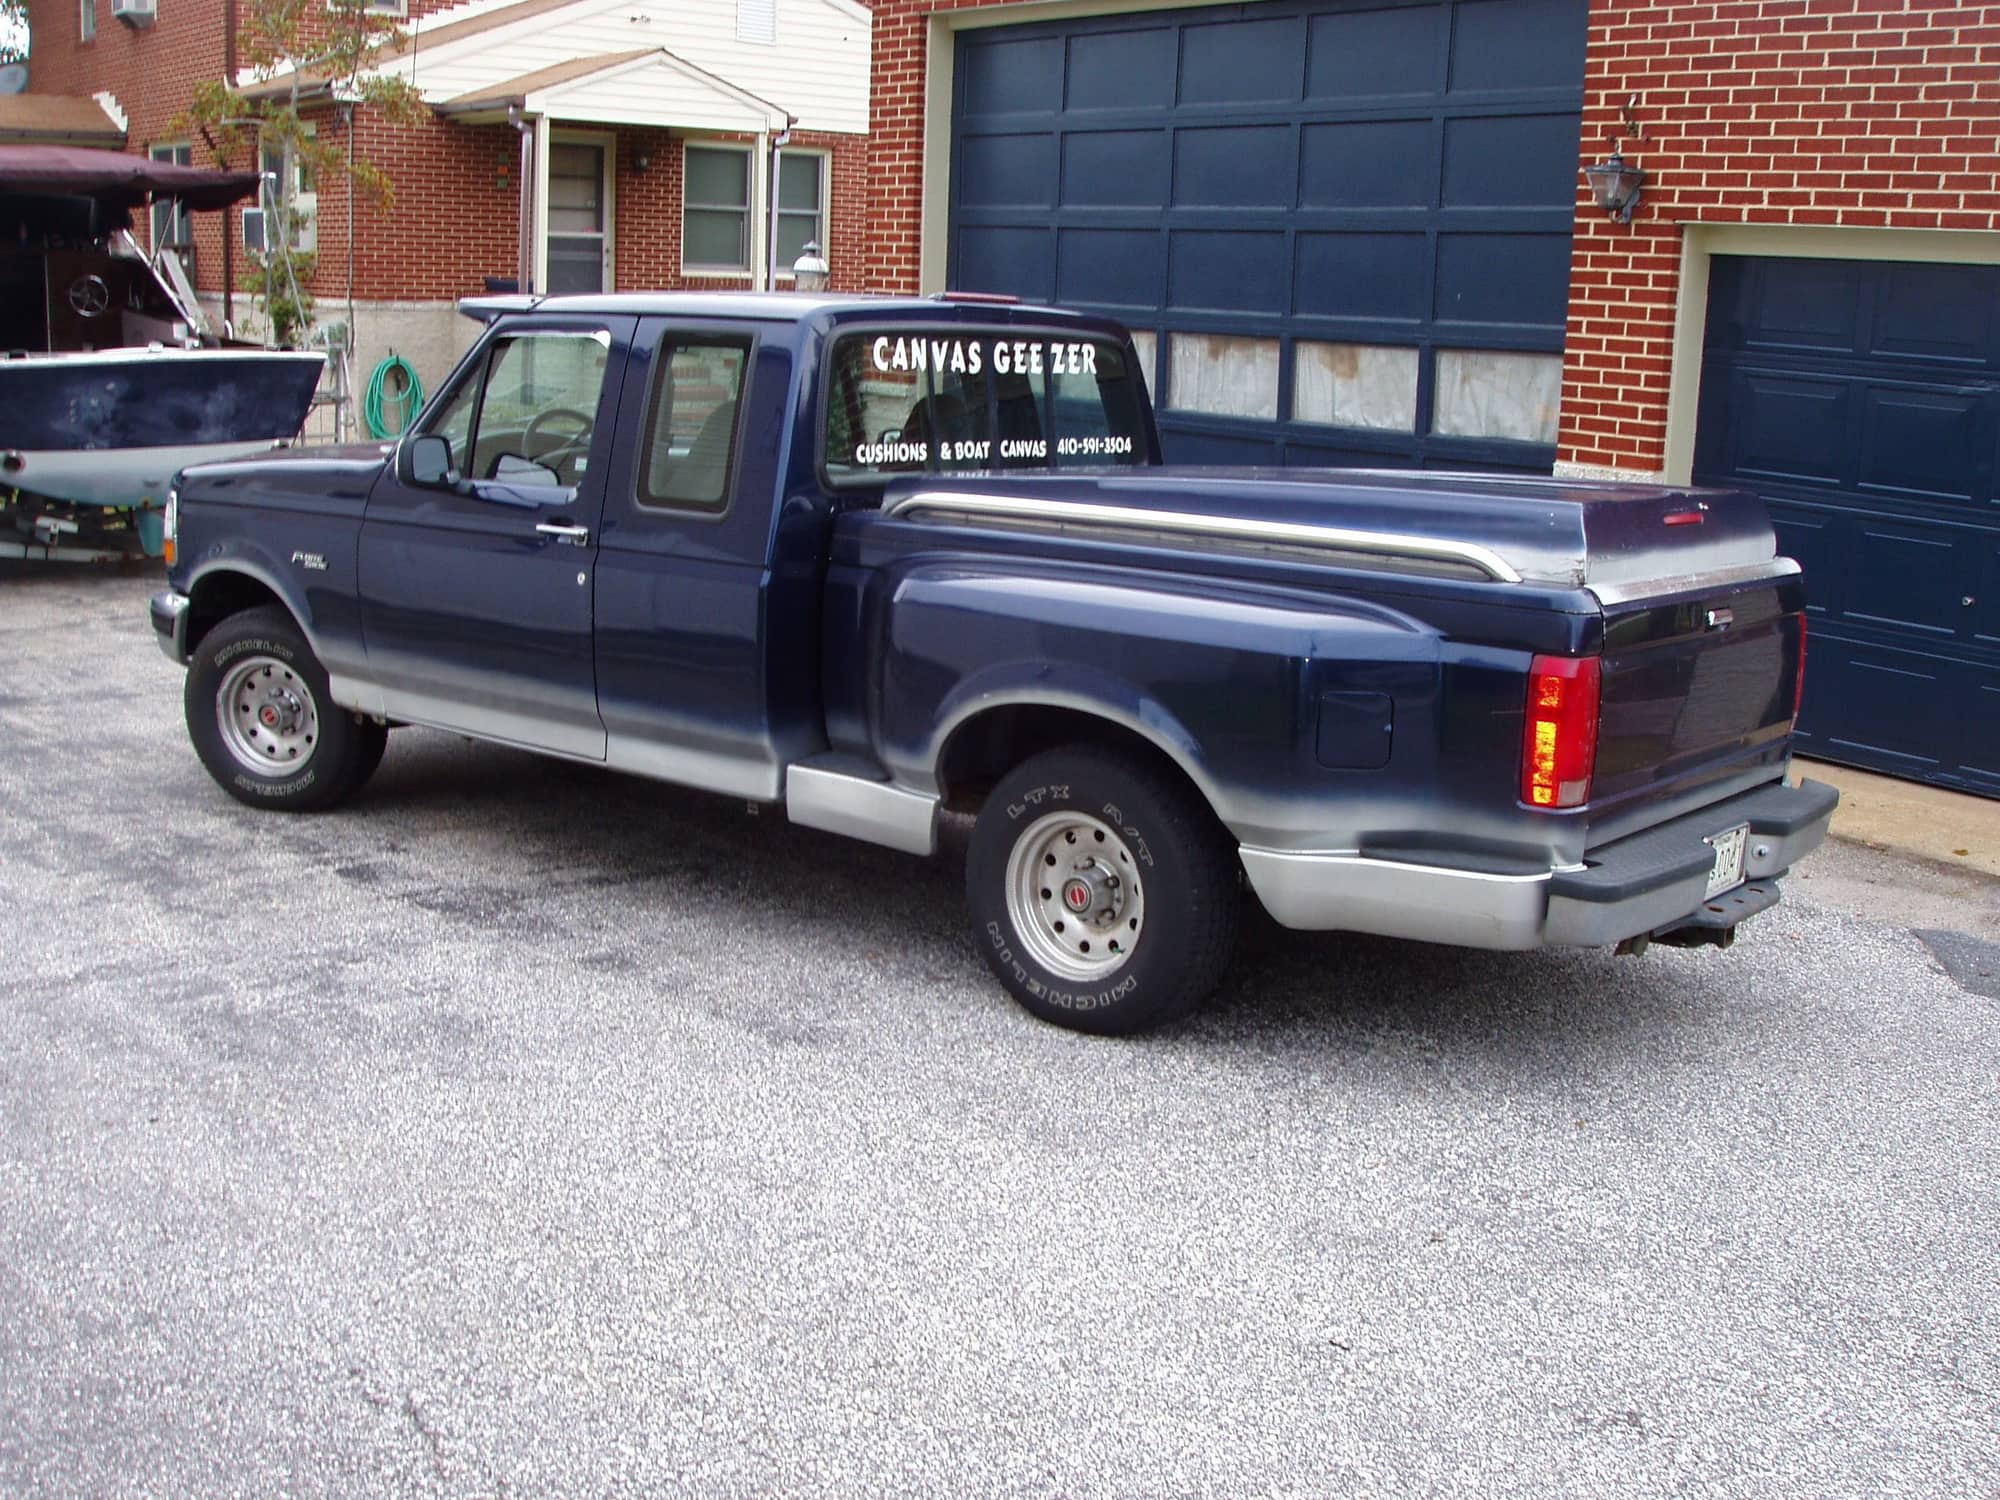 1994 Ford F-150 - F150 Stepside 1994 Ext Cab XLT - Used - VIN 1FTEX15N0RKA41564 - 8 cyl - 2WD - Automatic - Truck - Blue - Middle River, MD 21220, United States